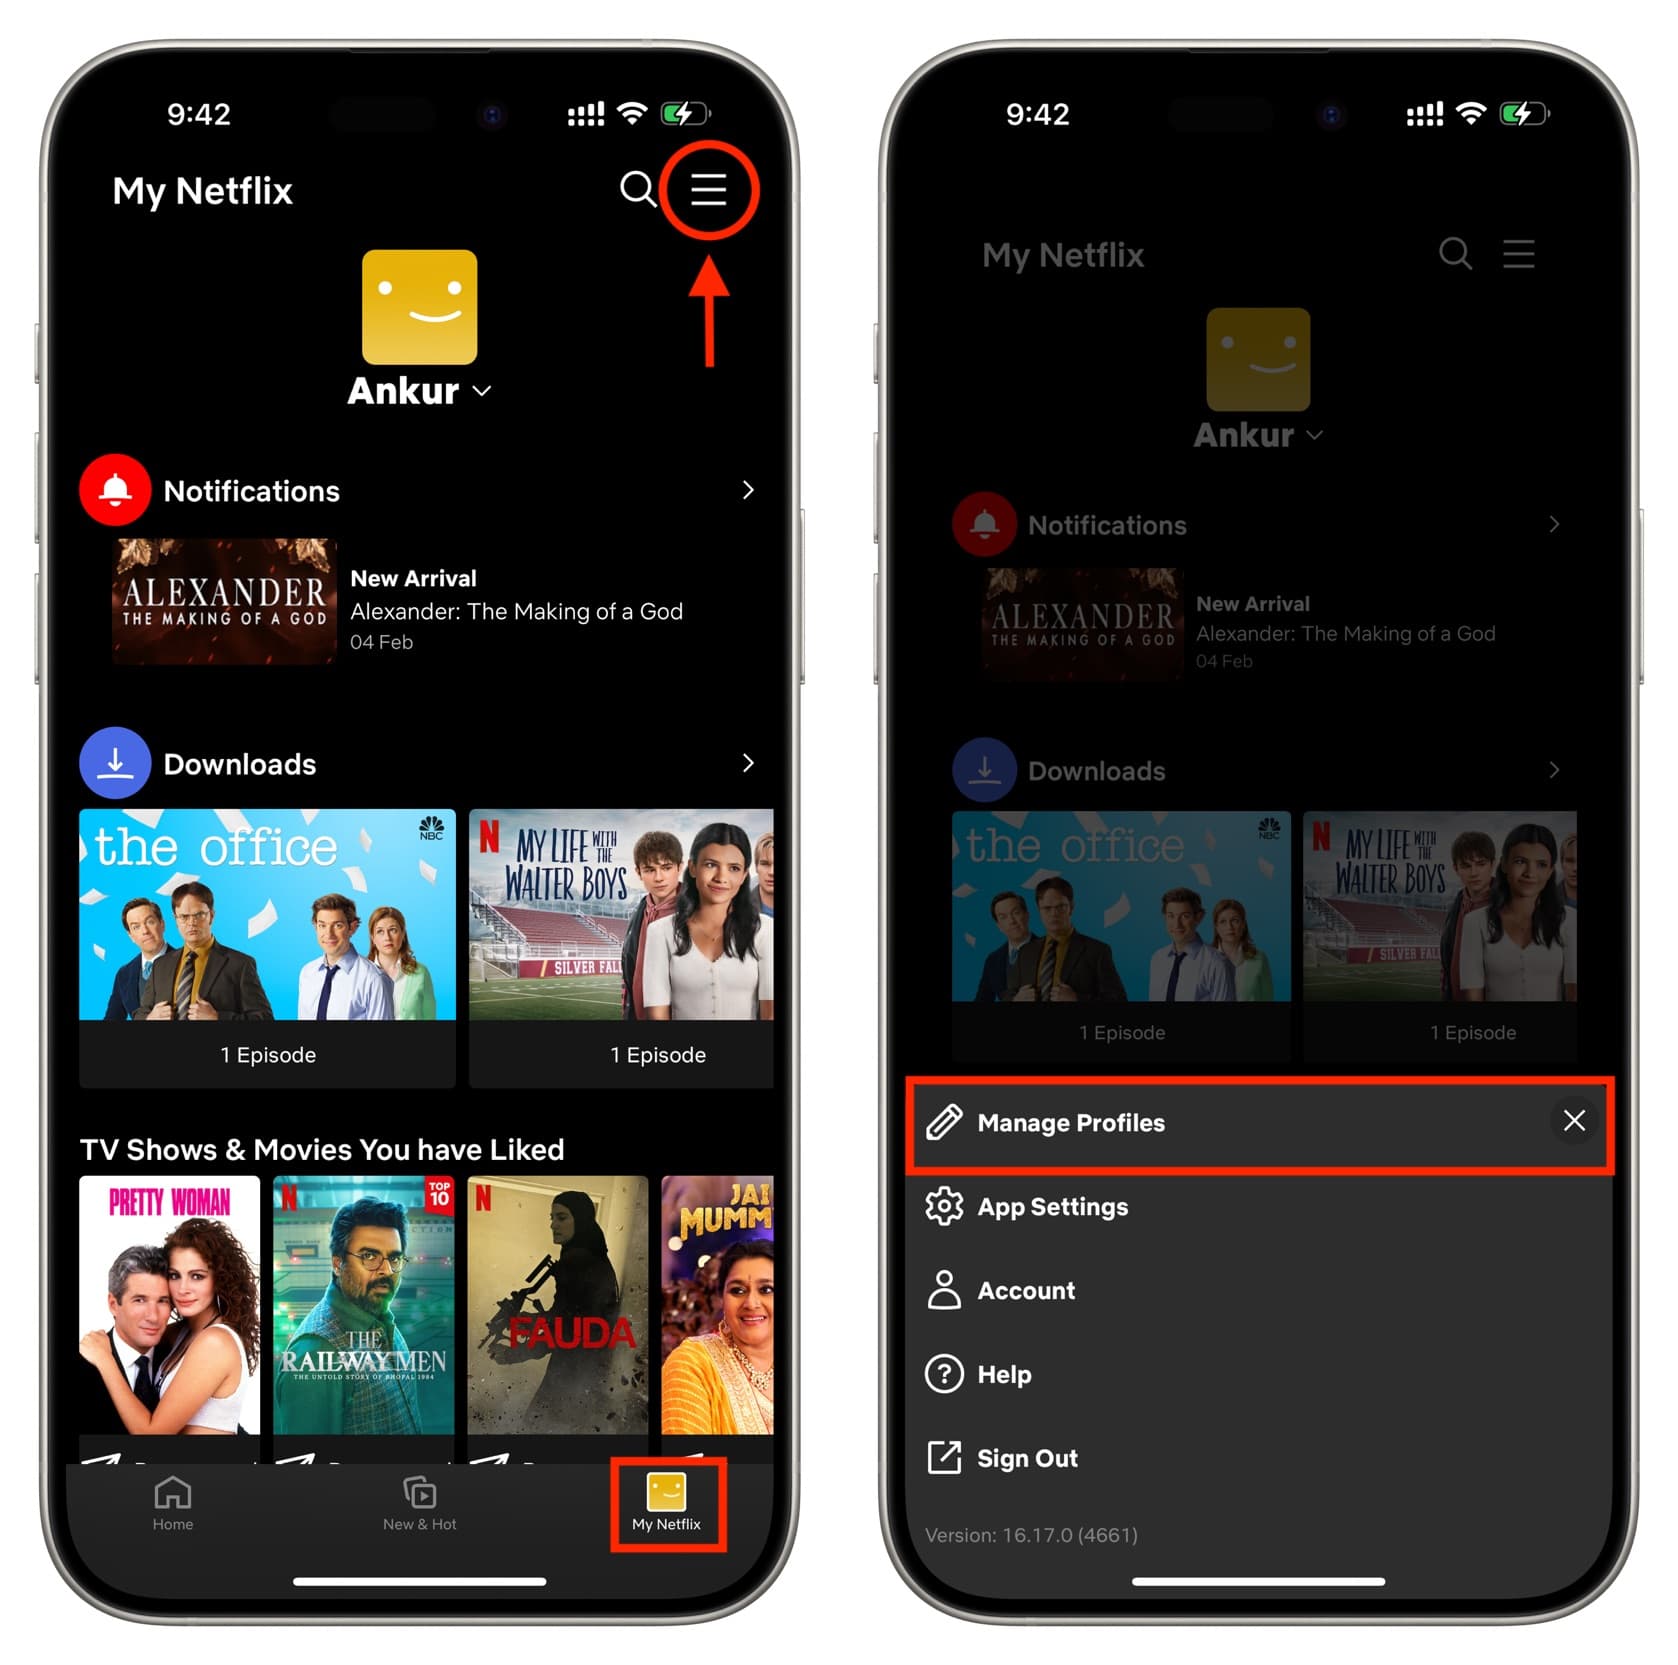 Manage Profiles in Netflix app on mobile